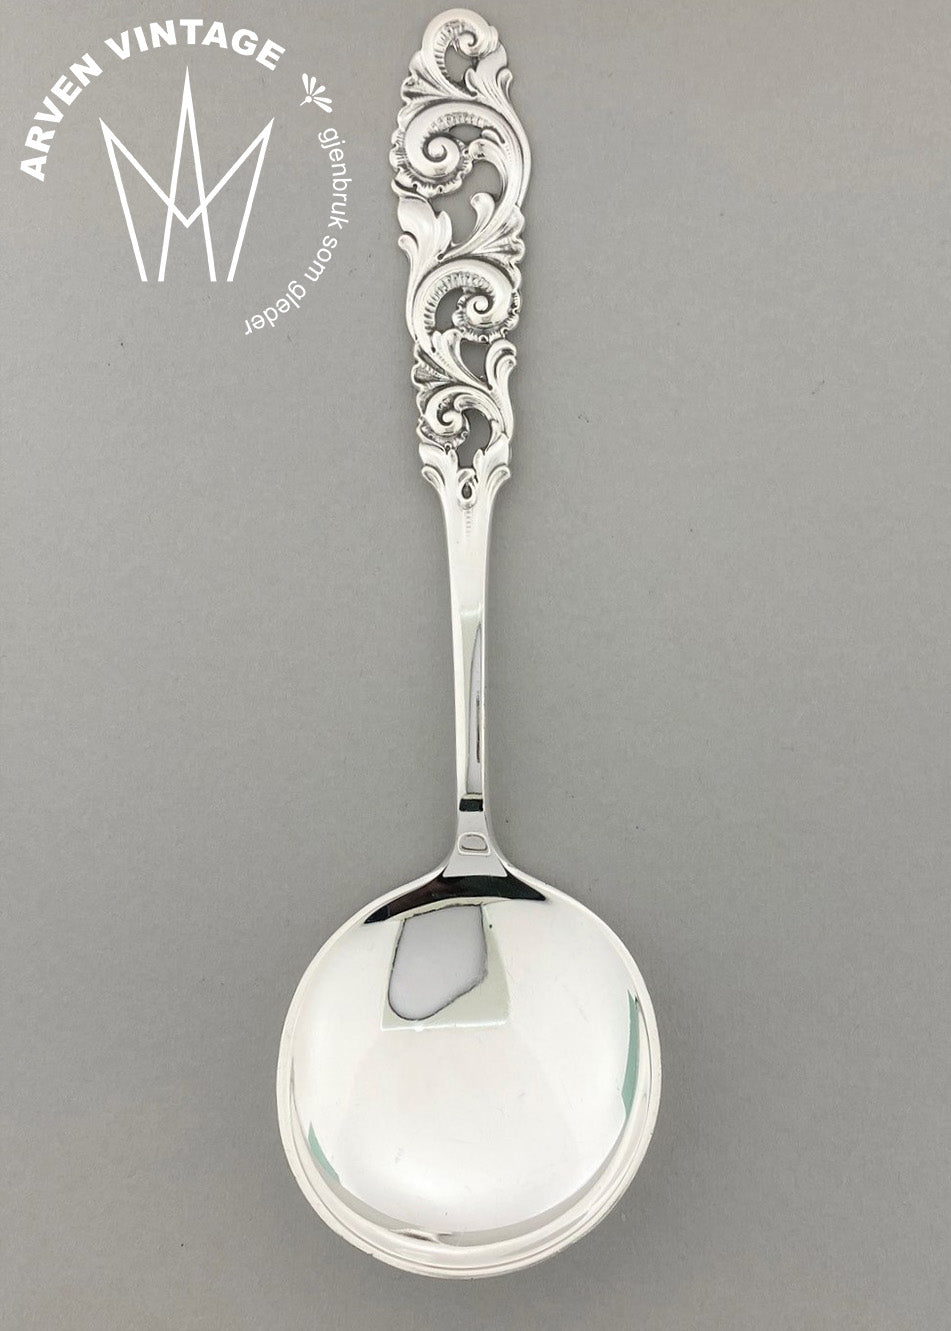 Vintage Telesilver confectionary spoon large